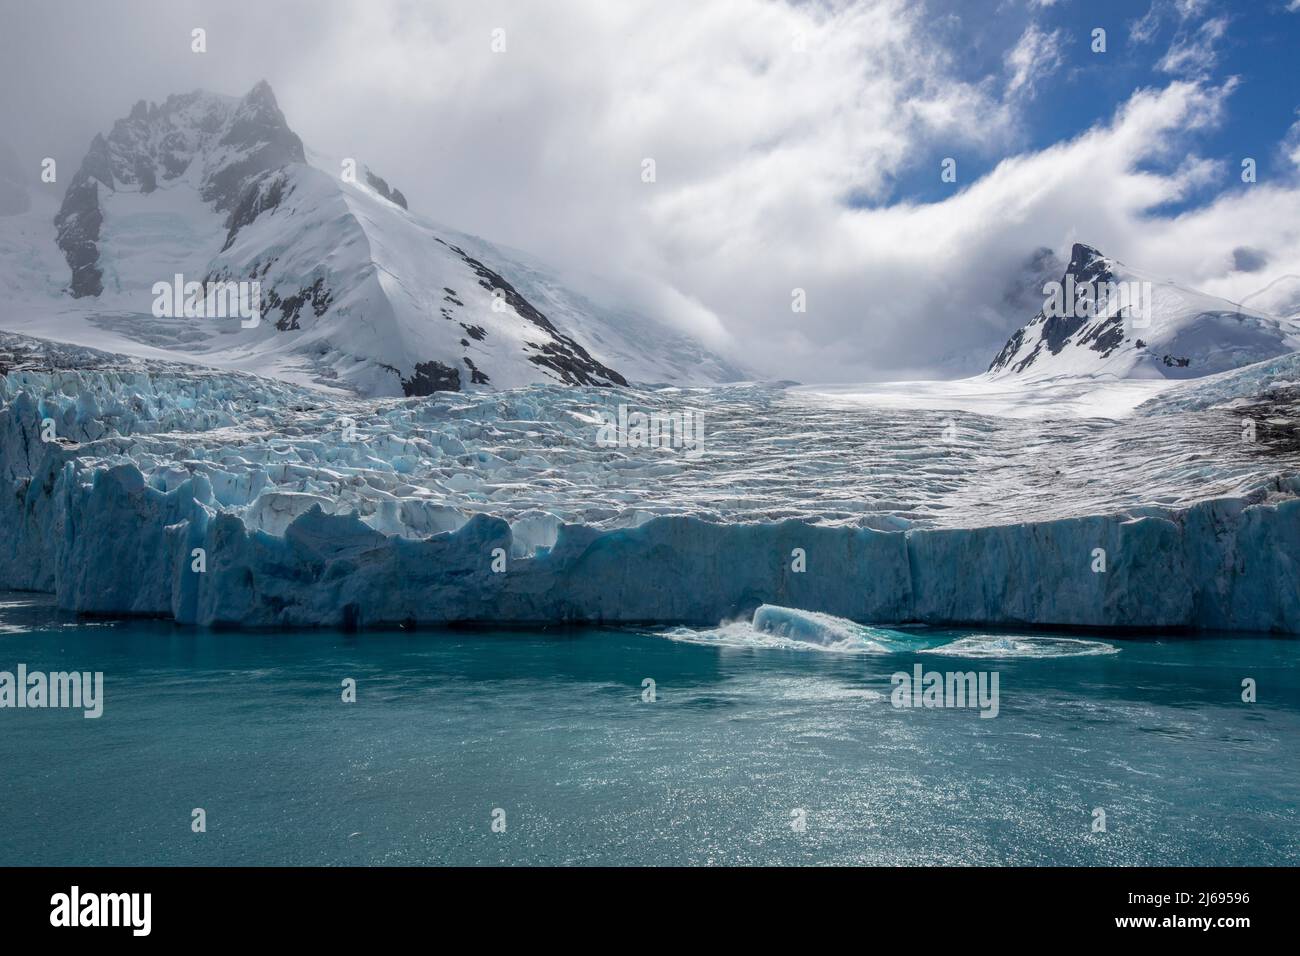 A view of snow-capped mountains and a shooter from the glacier in Drygalski Fjord, South Georgia, South Atlantic, Polar Regions Stock Photo